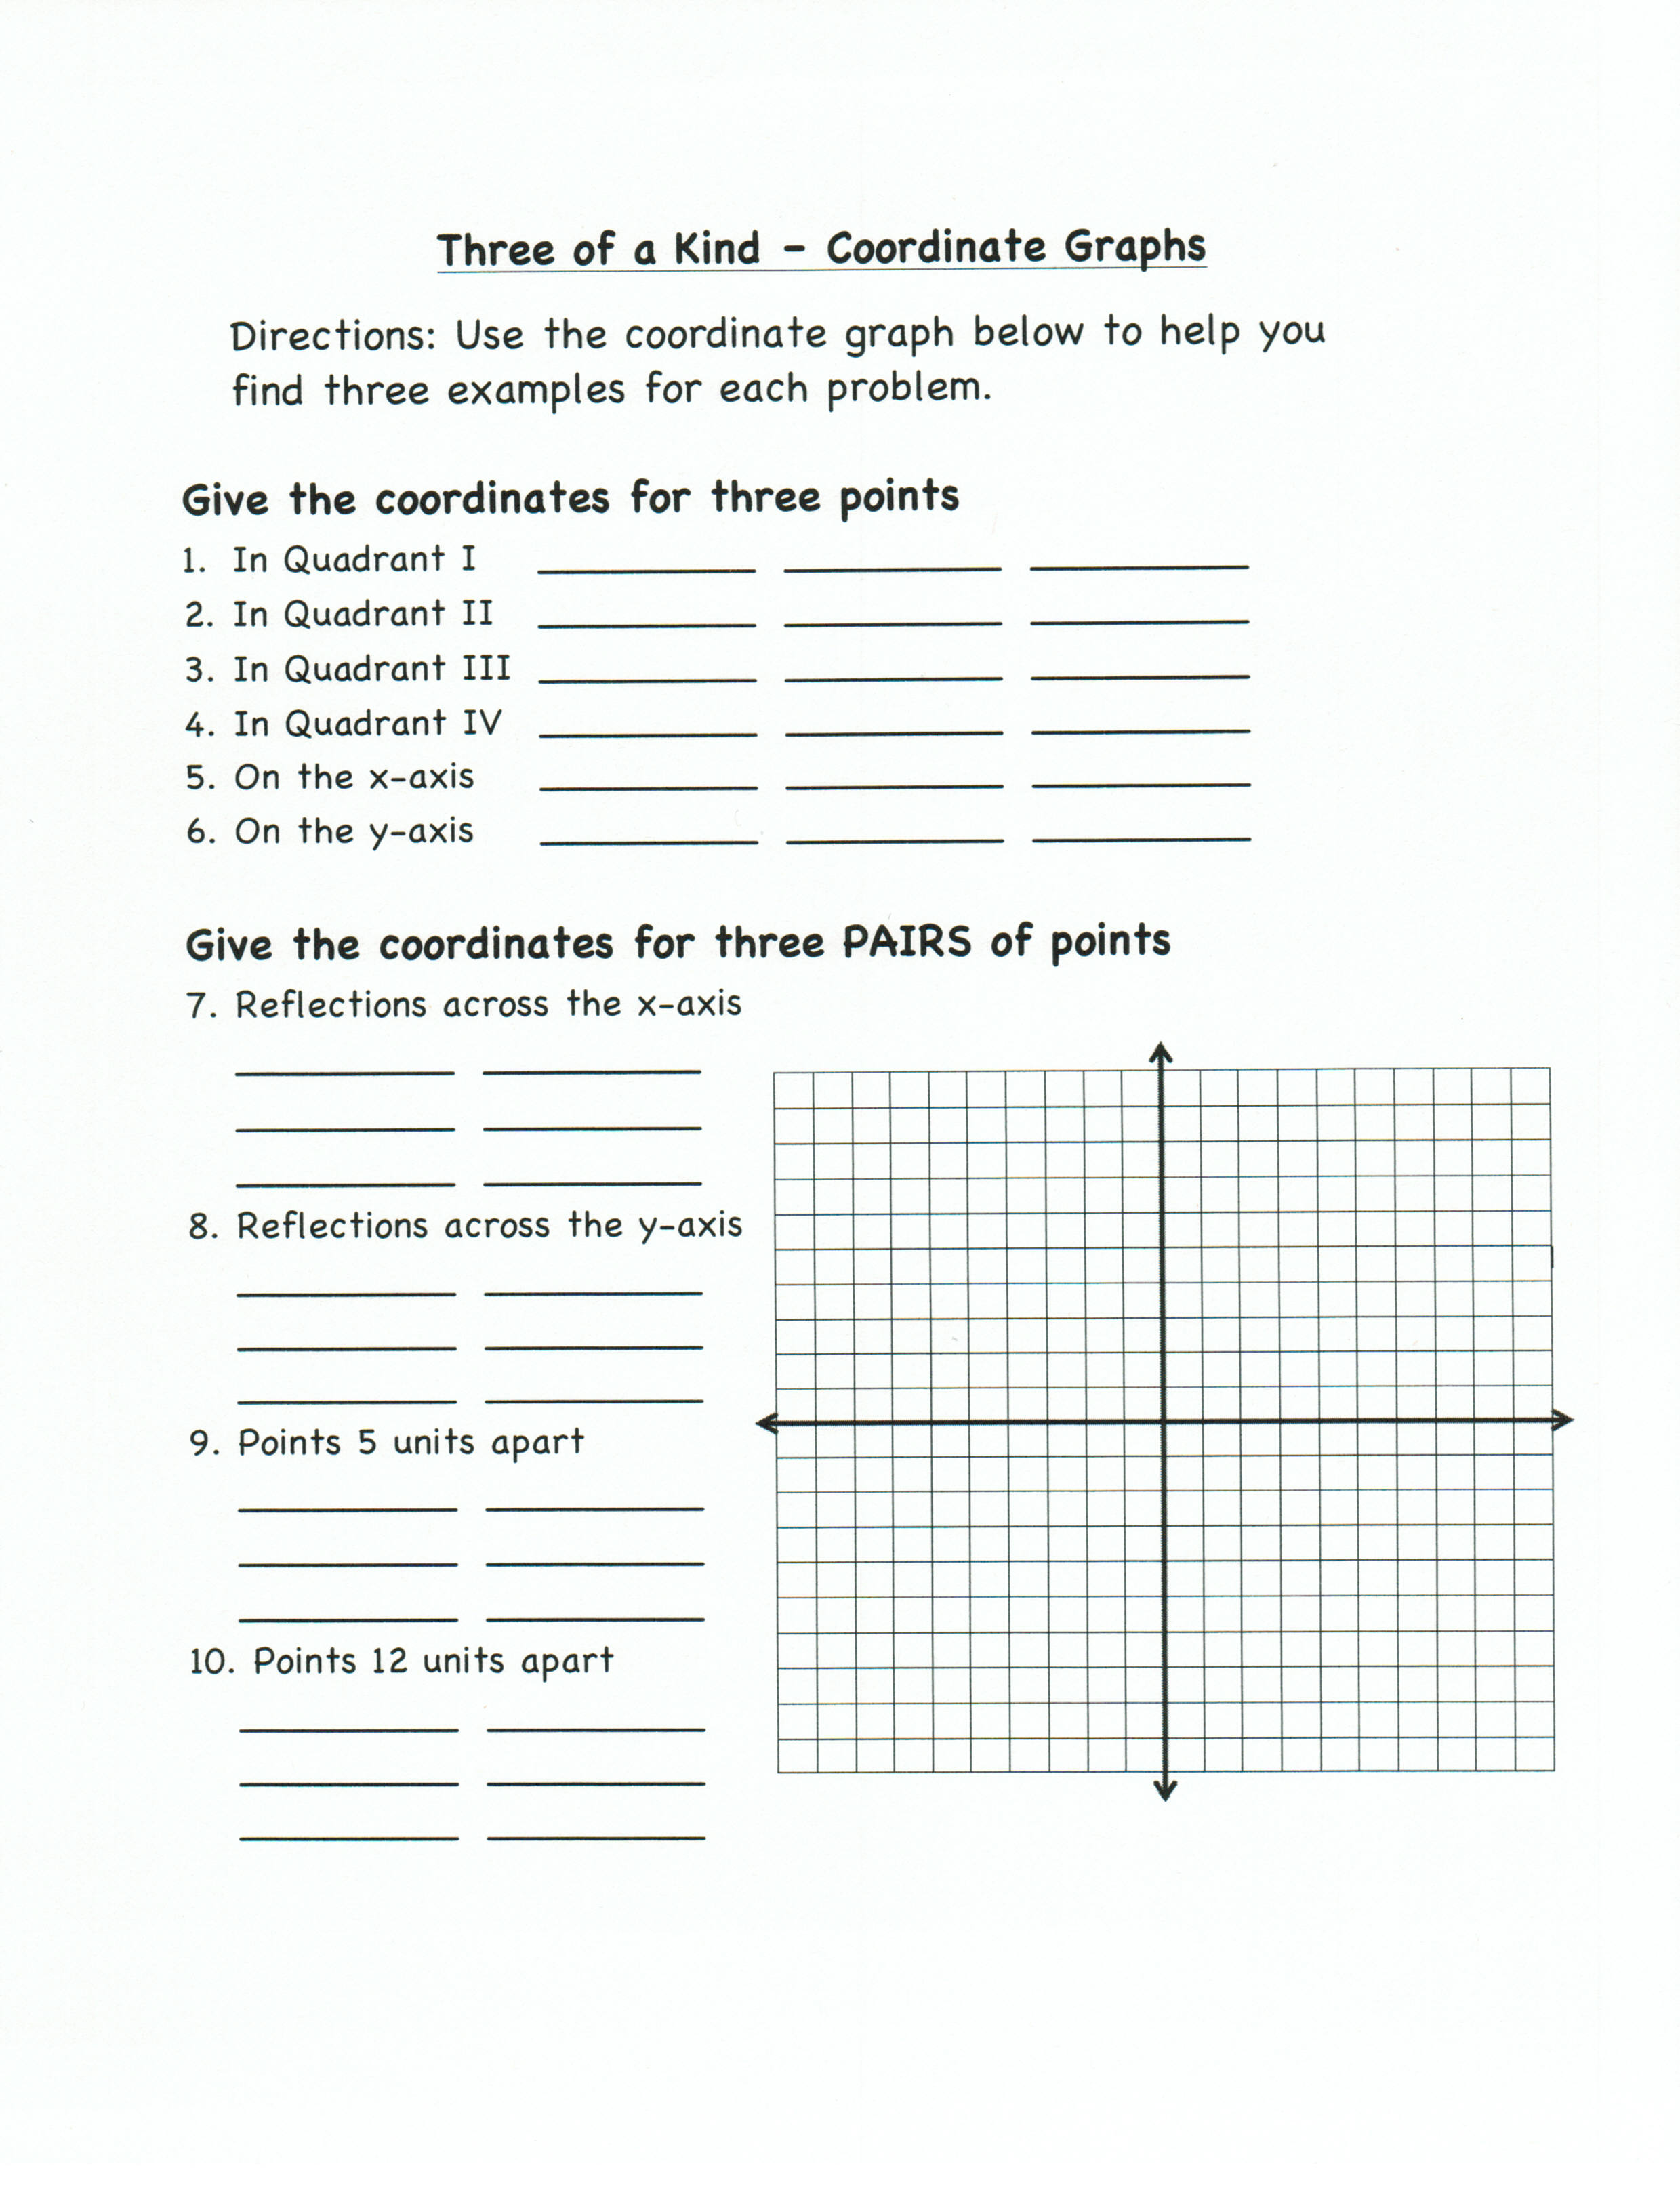 Rational Numbers On Coordinate Plane Worksheets